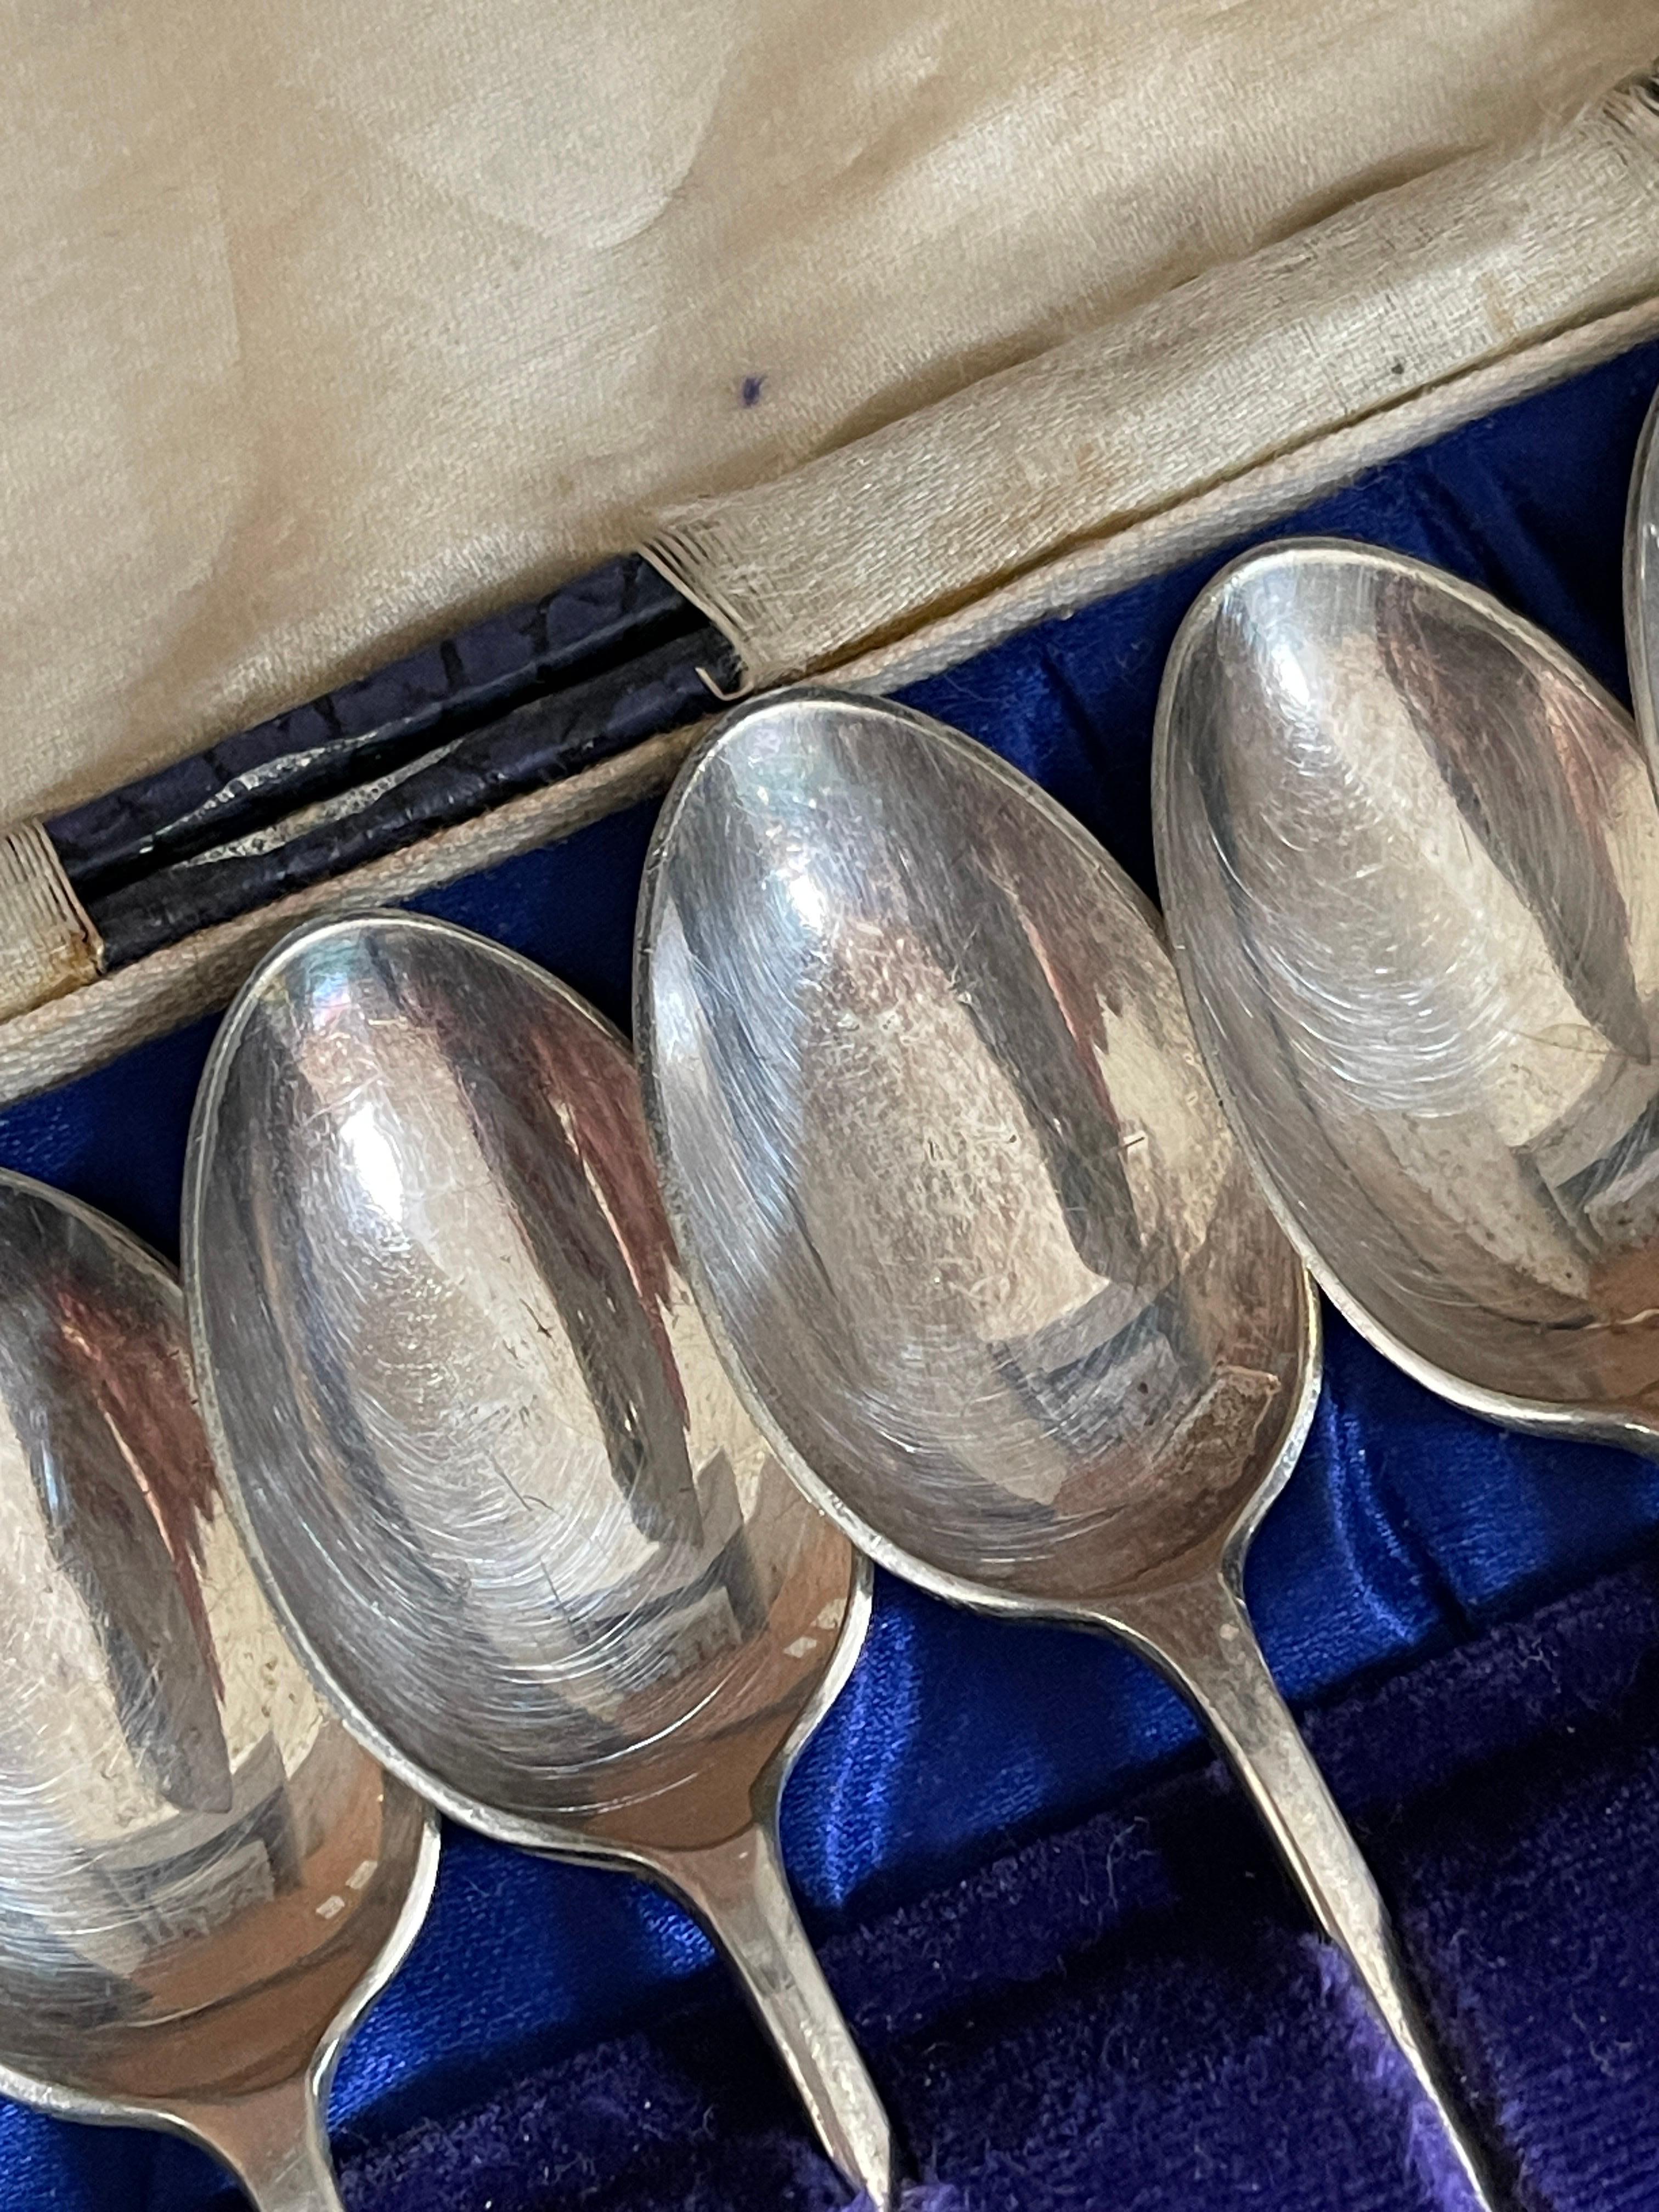 Organic Material Exclusive Tea COFFEE SPOONS, 6 pcs. Sterling Silver & Box, Antique Silver Spoons For Sale